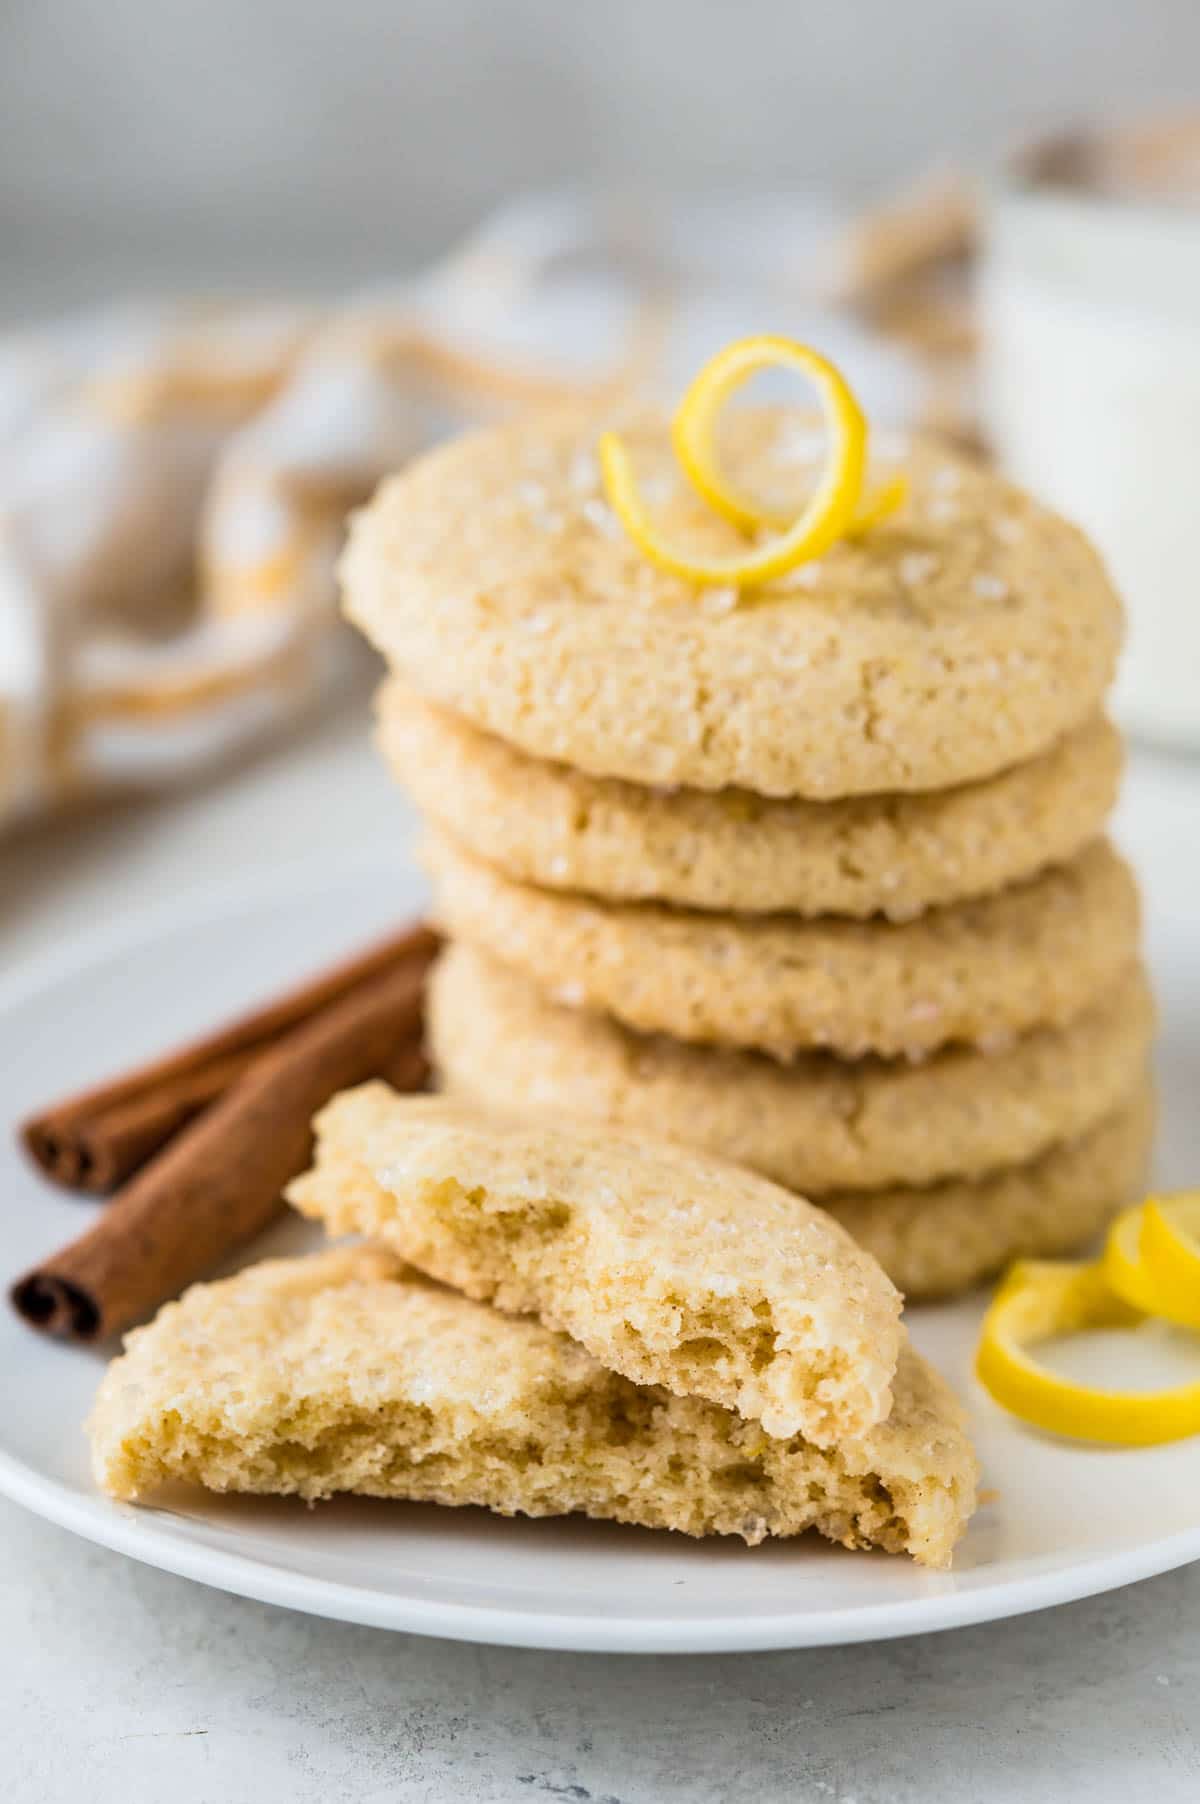 chewy lemon sugar cookies on a plate with a twist of lemon and cinnamon sticks.